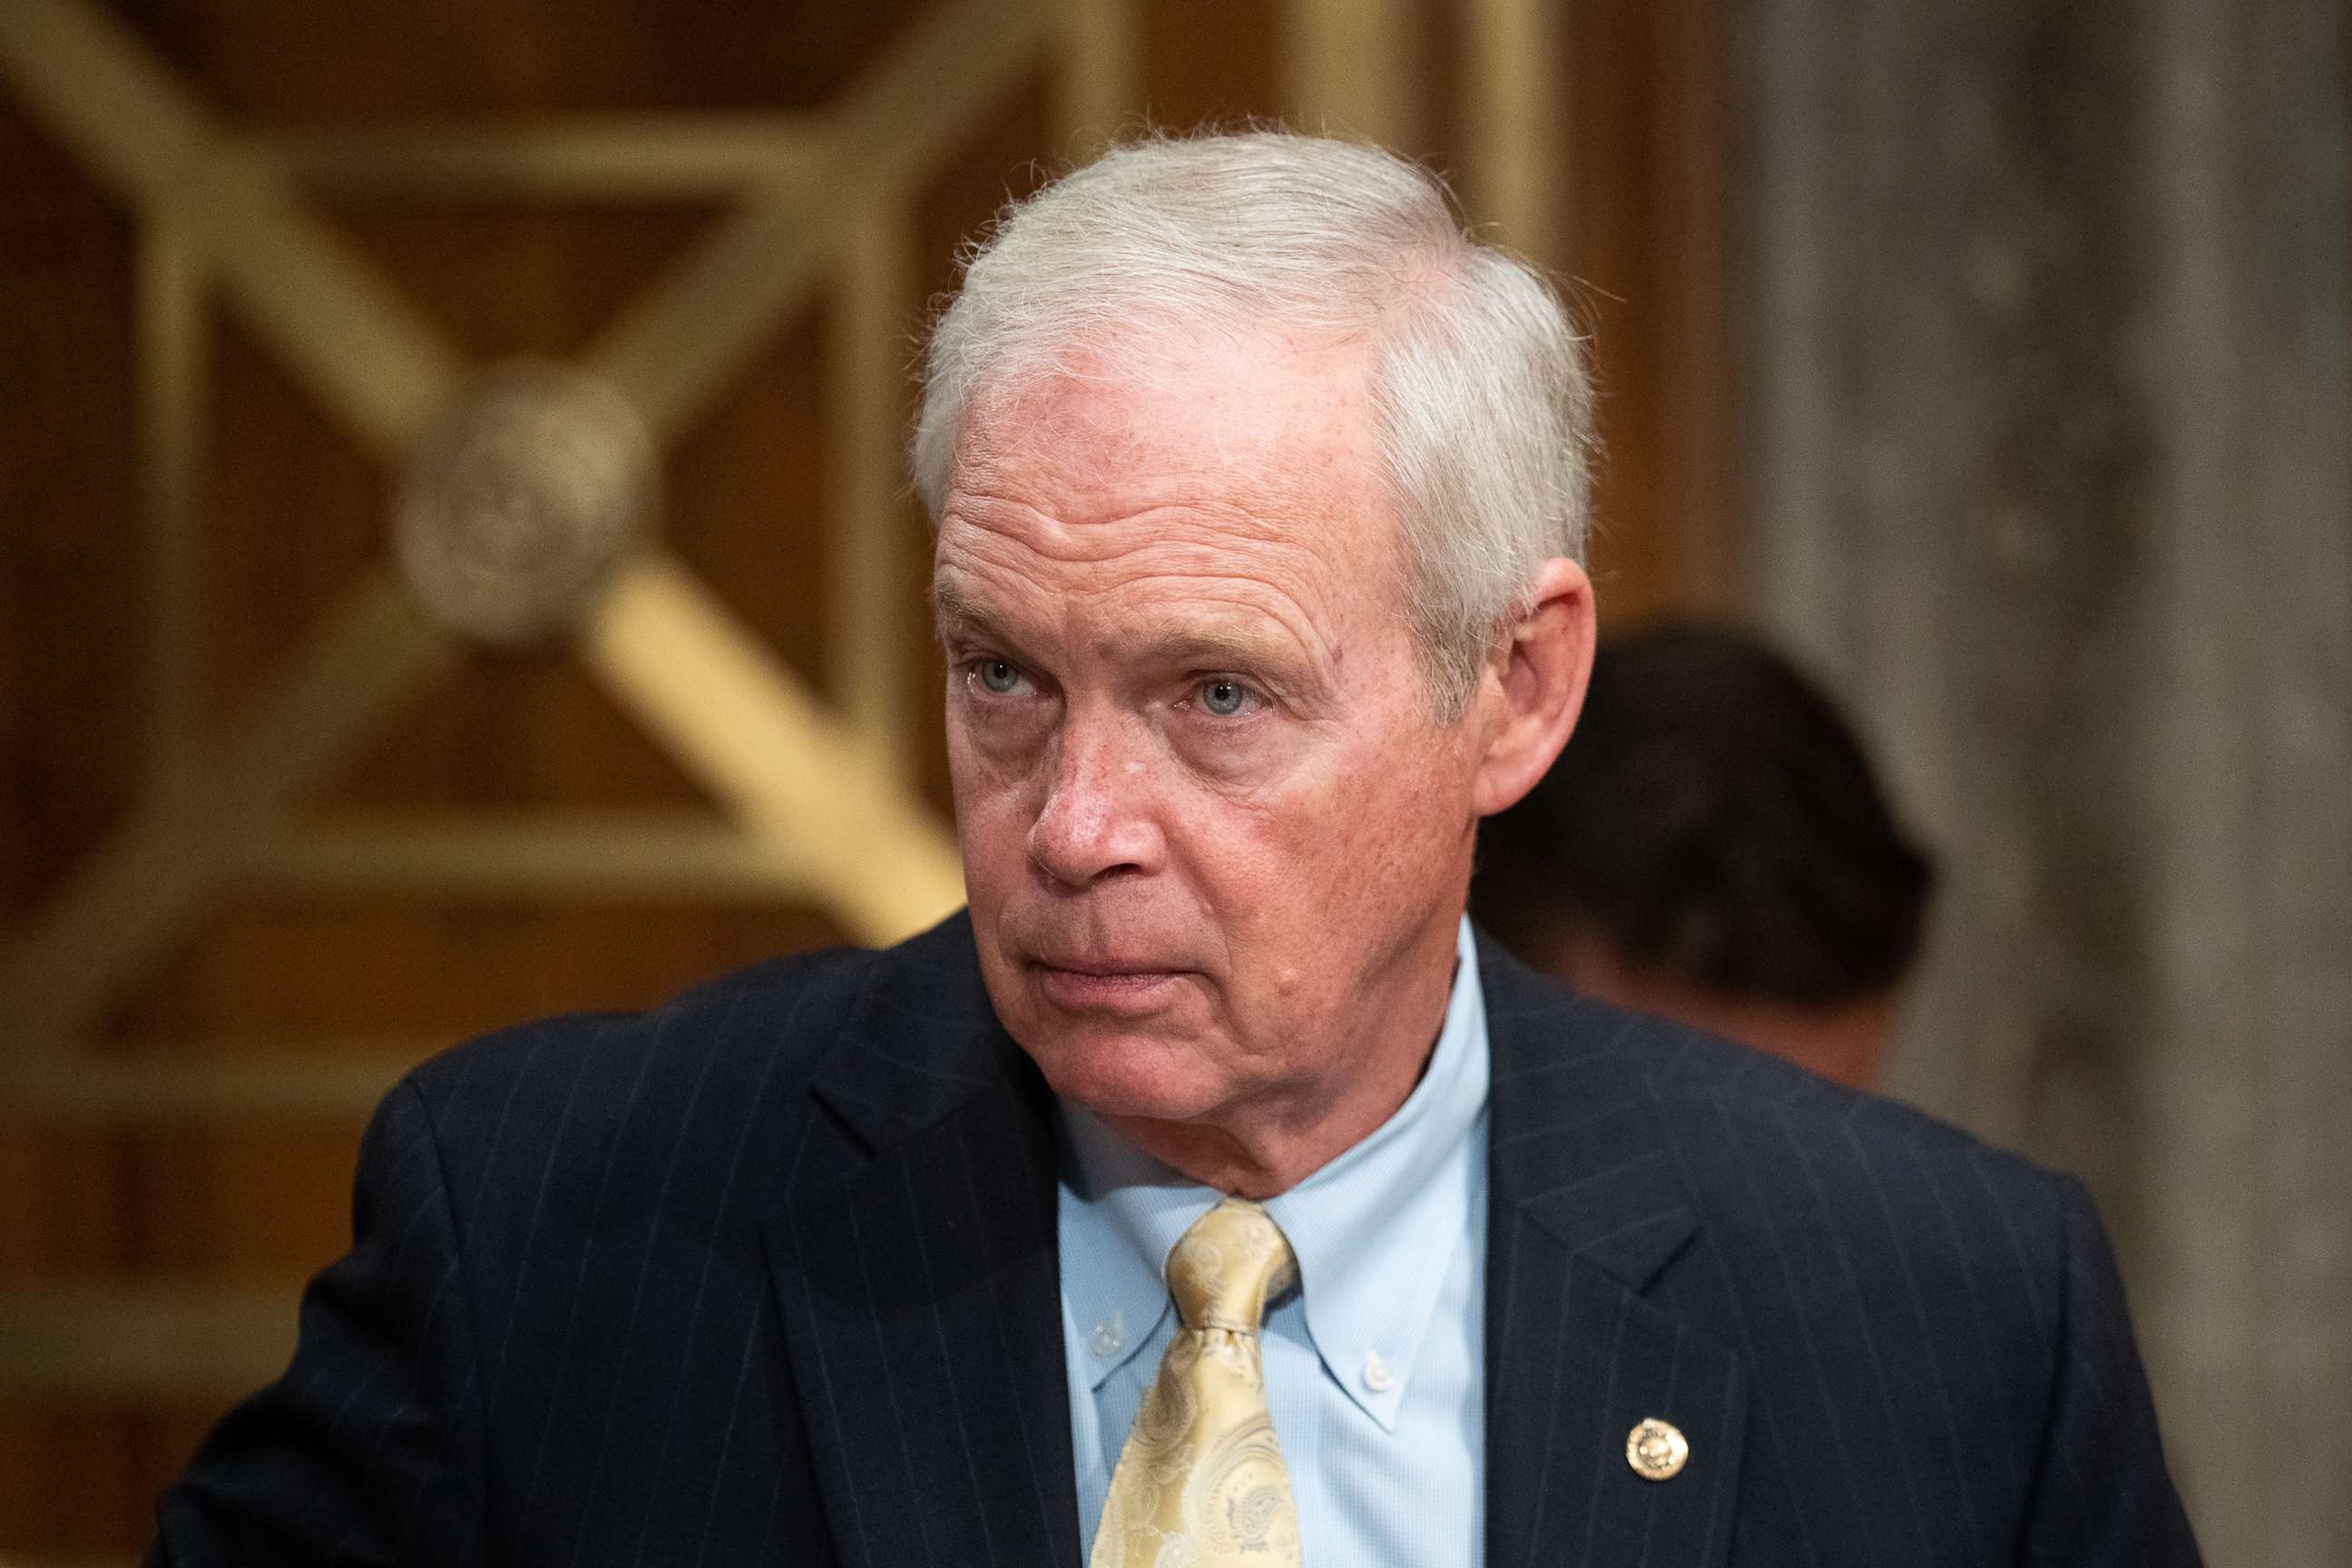 PHOTO: Sen. Ron Johnson participates in a Homeland Security & Governmental Affairs hearing on Sept. 21, 2022, in Washington, D.C.